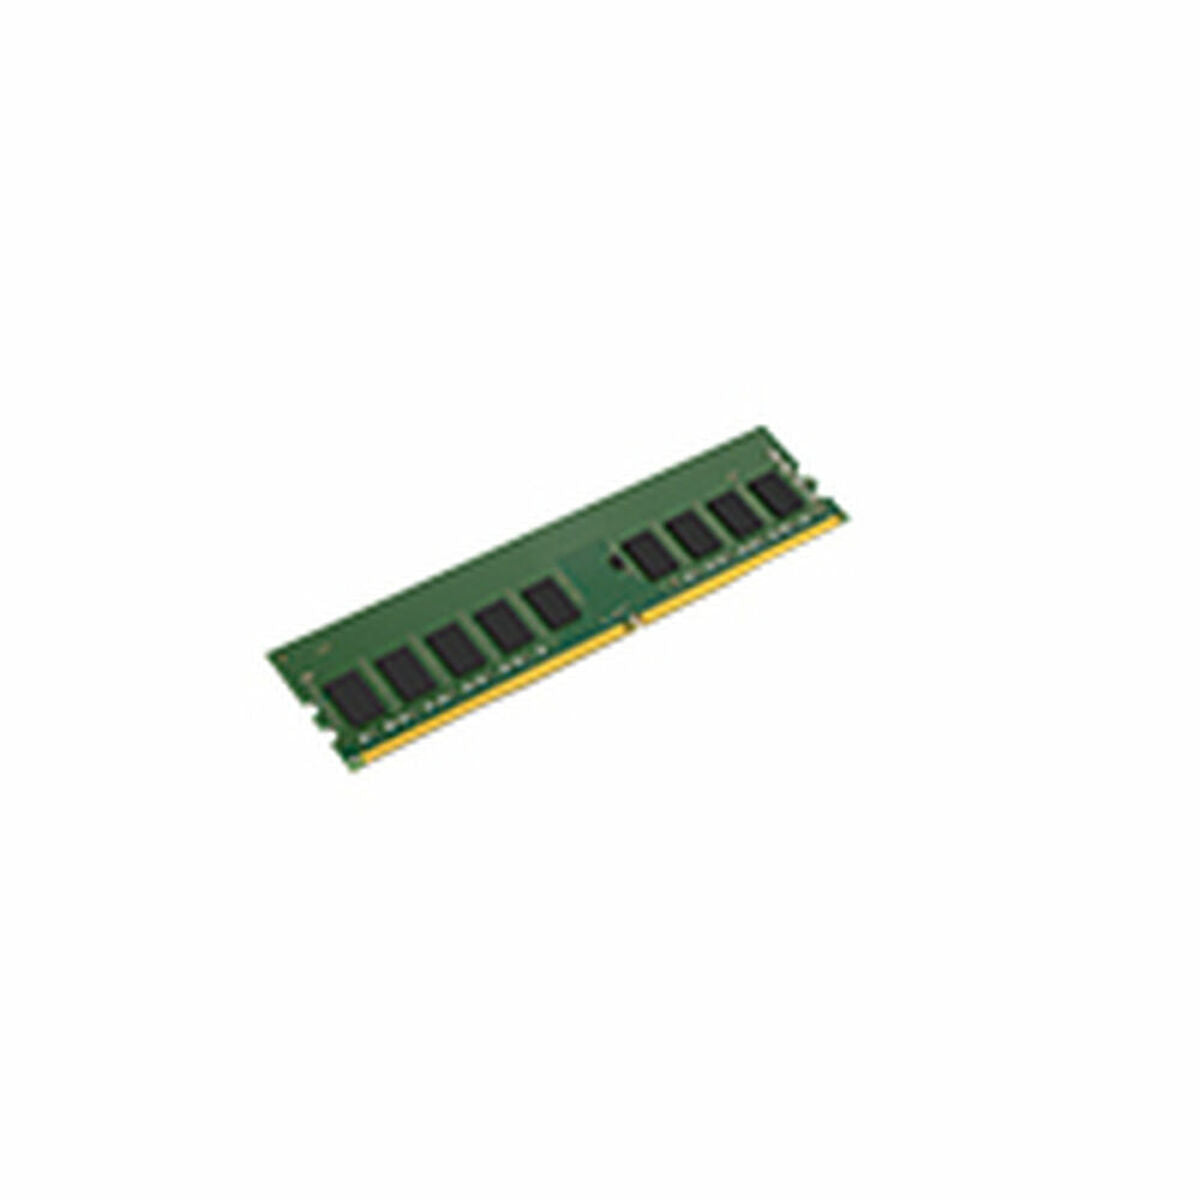 RAM Memory Kingston KTH-PL426E/16G       16 GB DDR4, Kingston, Computing, Components, ram-memory-kingston-kth-pl426e-16g-16-gb-ddr4, Brand_Kingston, category-reference-2609, category-reference-2803, category-reference-2807, category-reference-t-19685, category-reference-t-19912, category-reference-t-21360, computers / components, Condition_NEW, Price_50 - 100, Teleworking, RiotNook